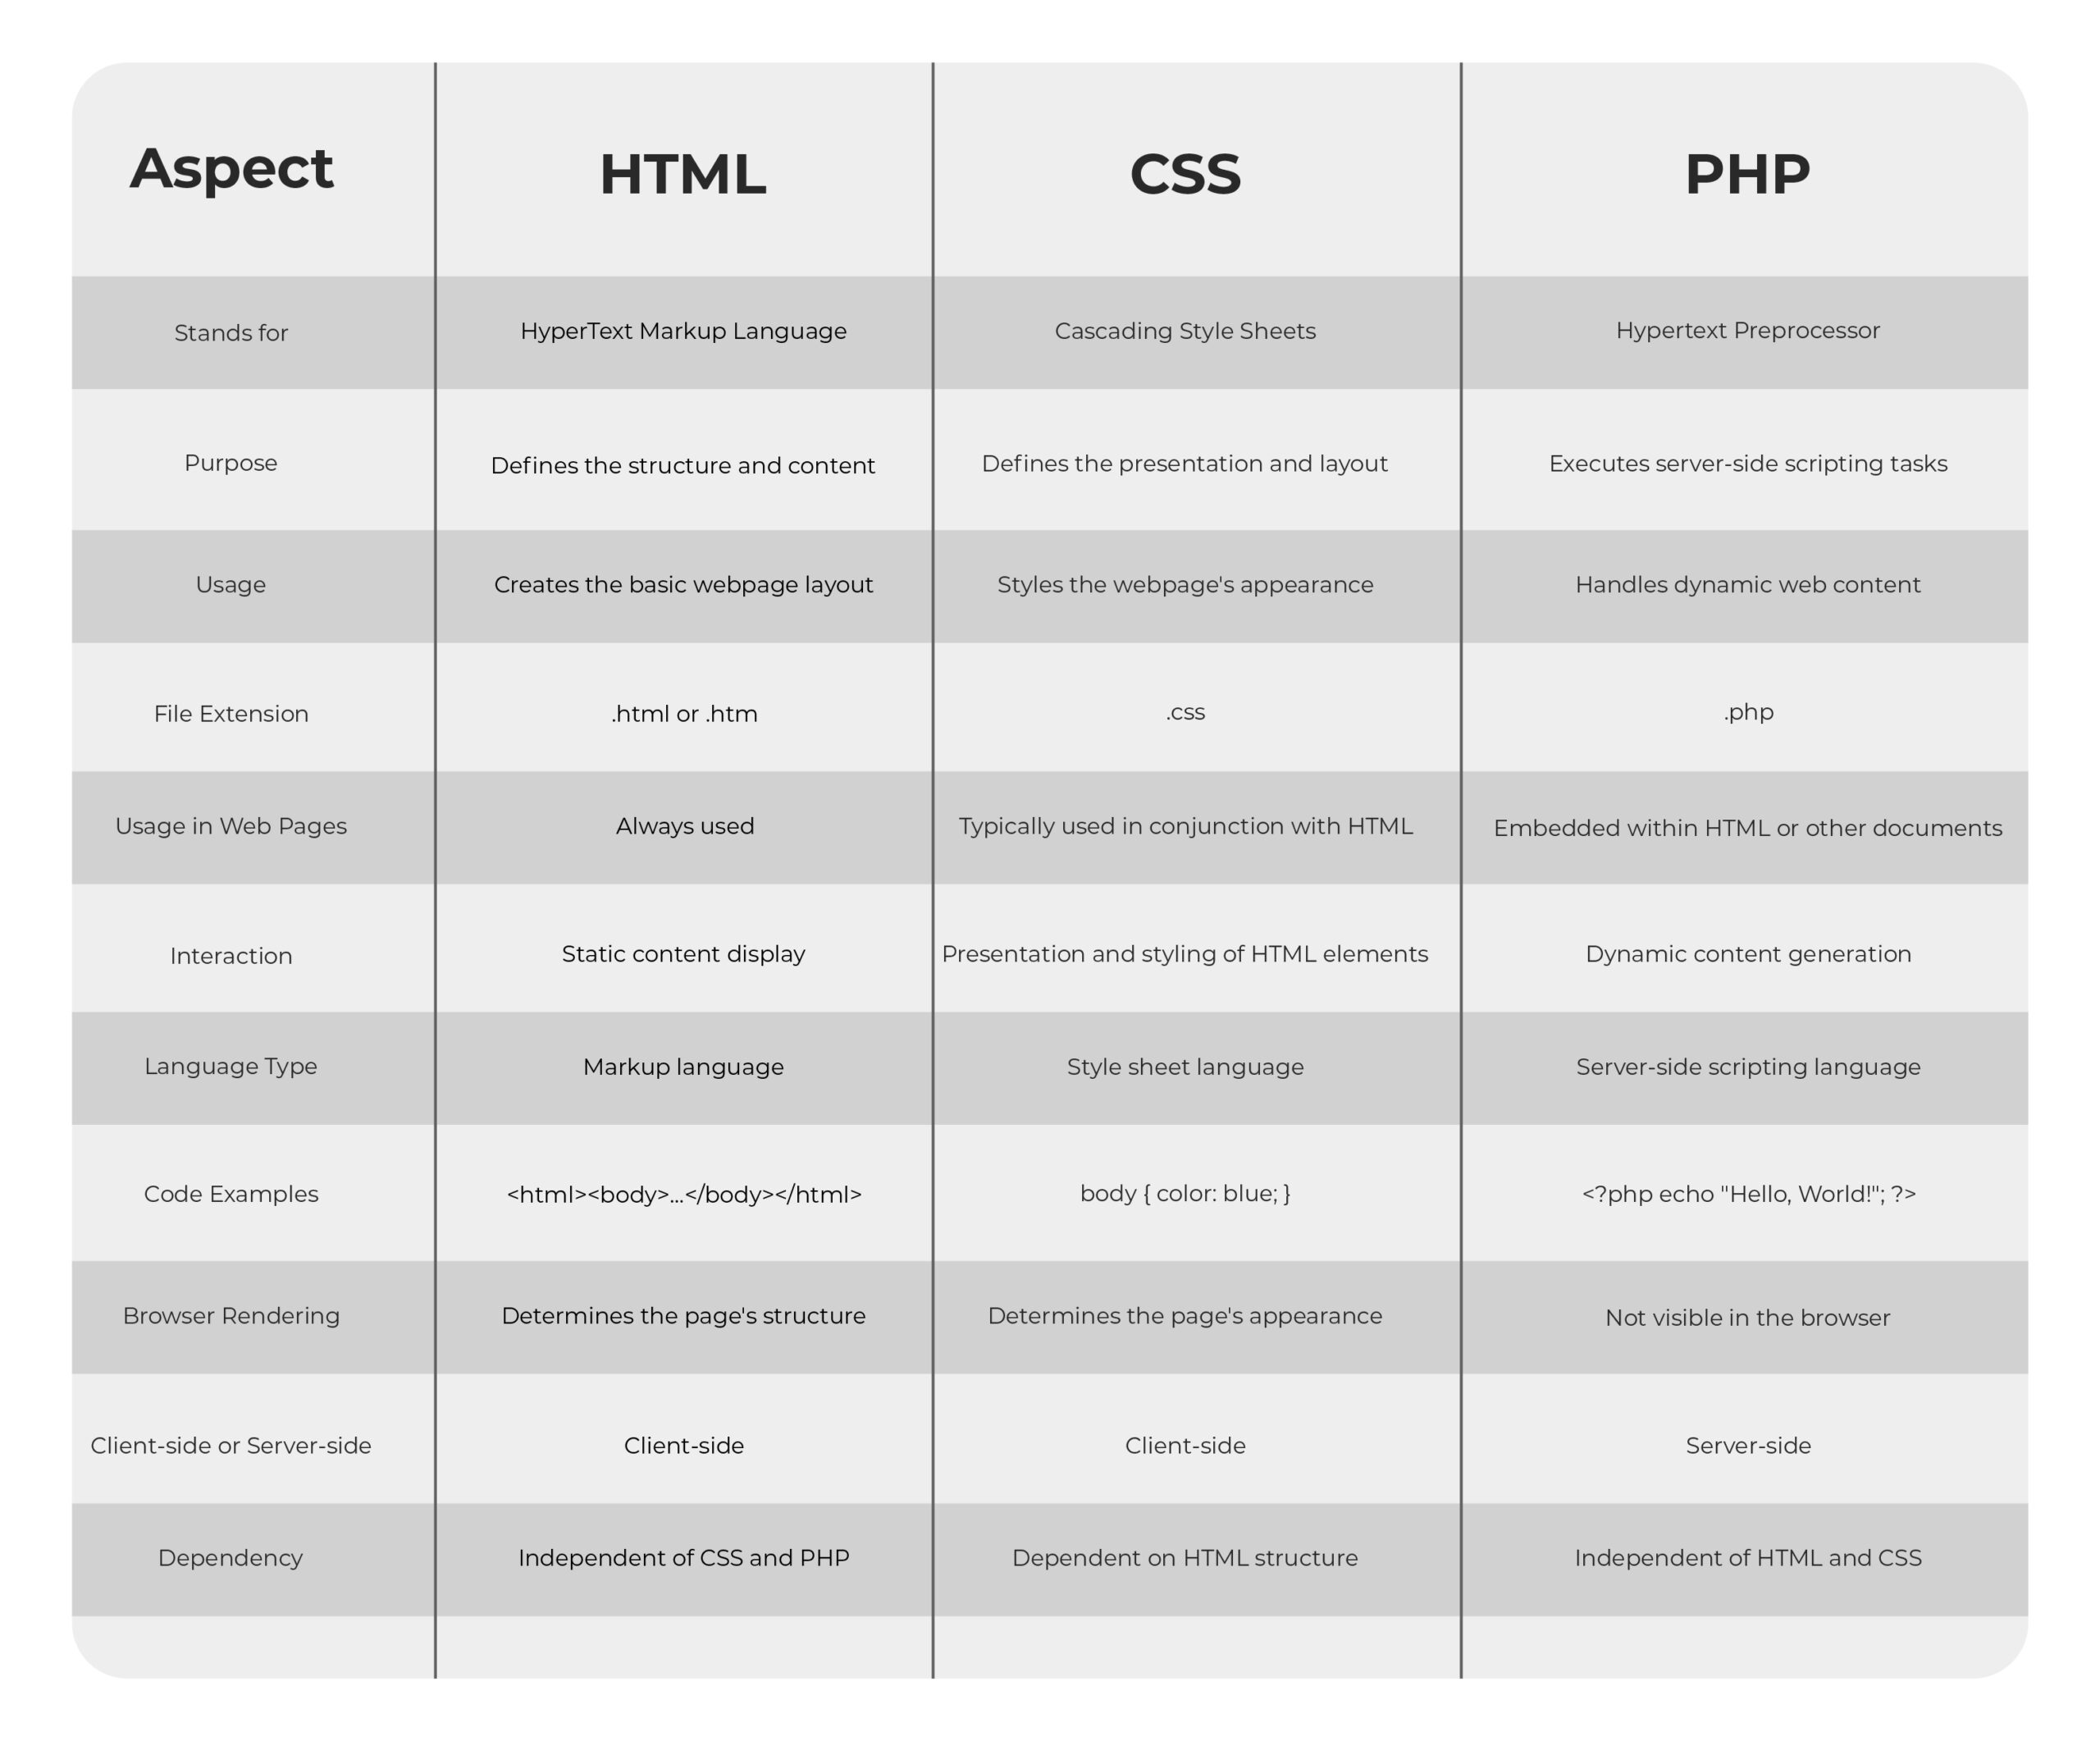 HTML, CSS, PHP